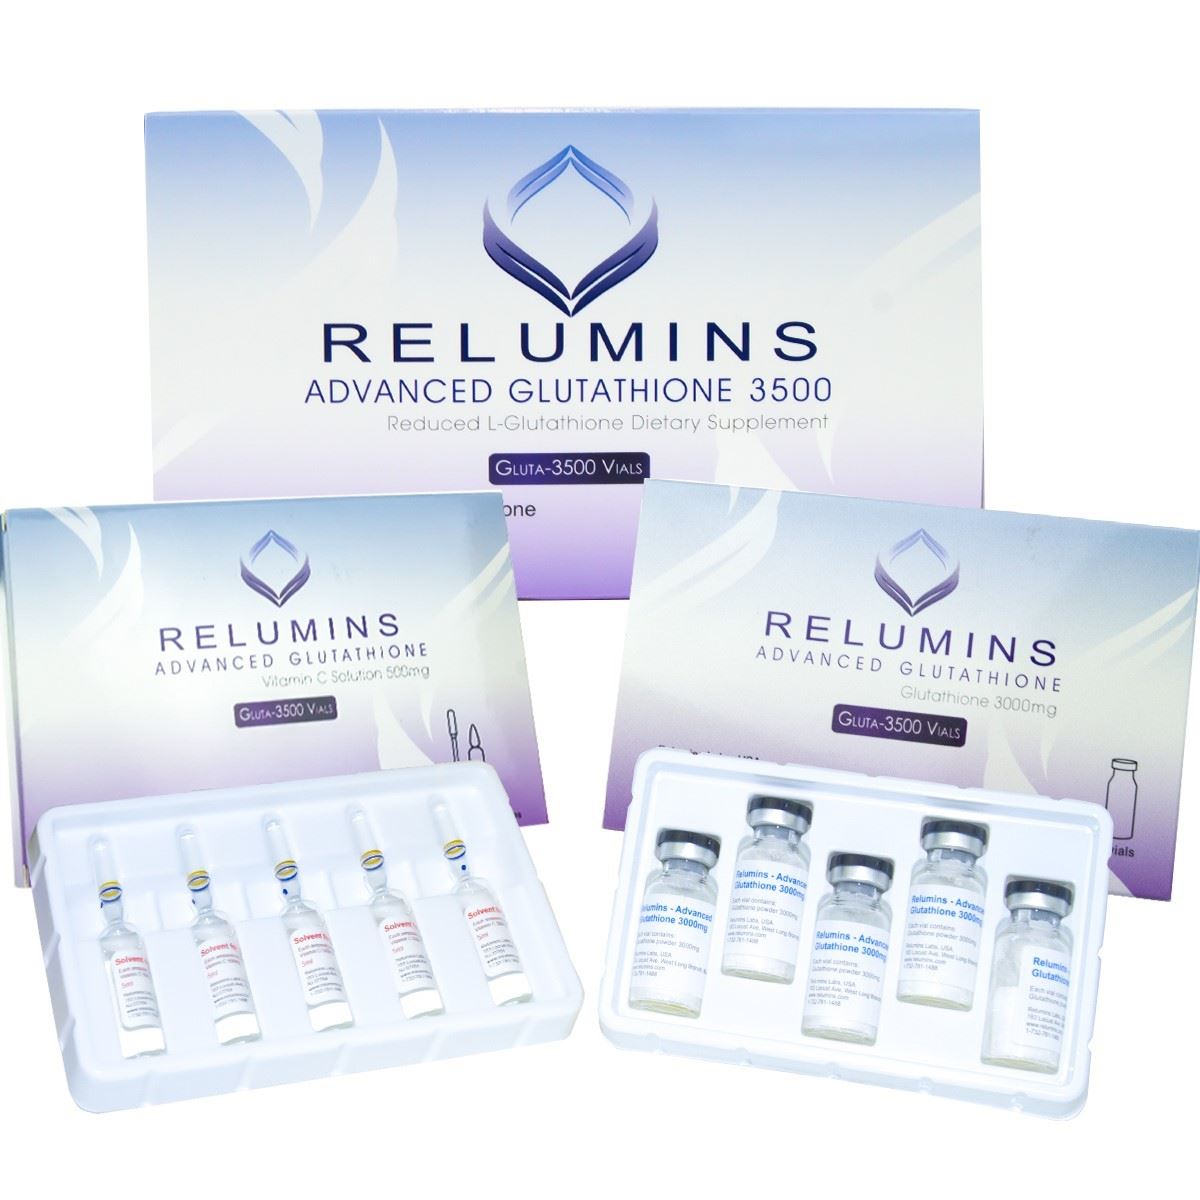 Relumins Advanced Glutathione 3500mg Injection in India